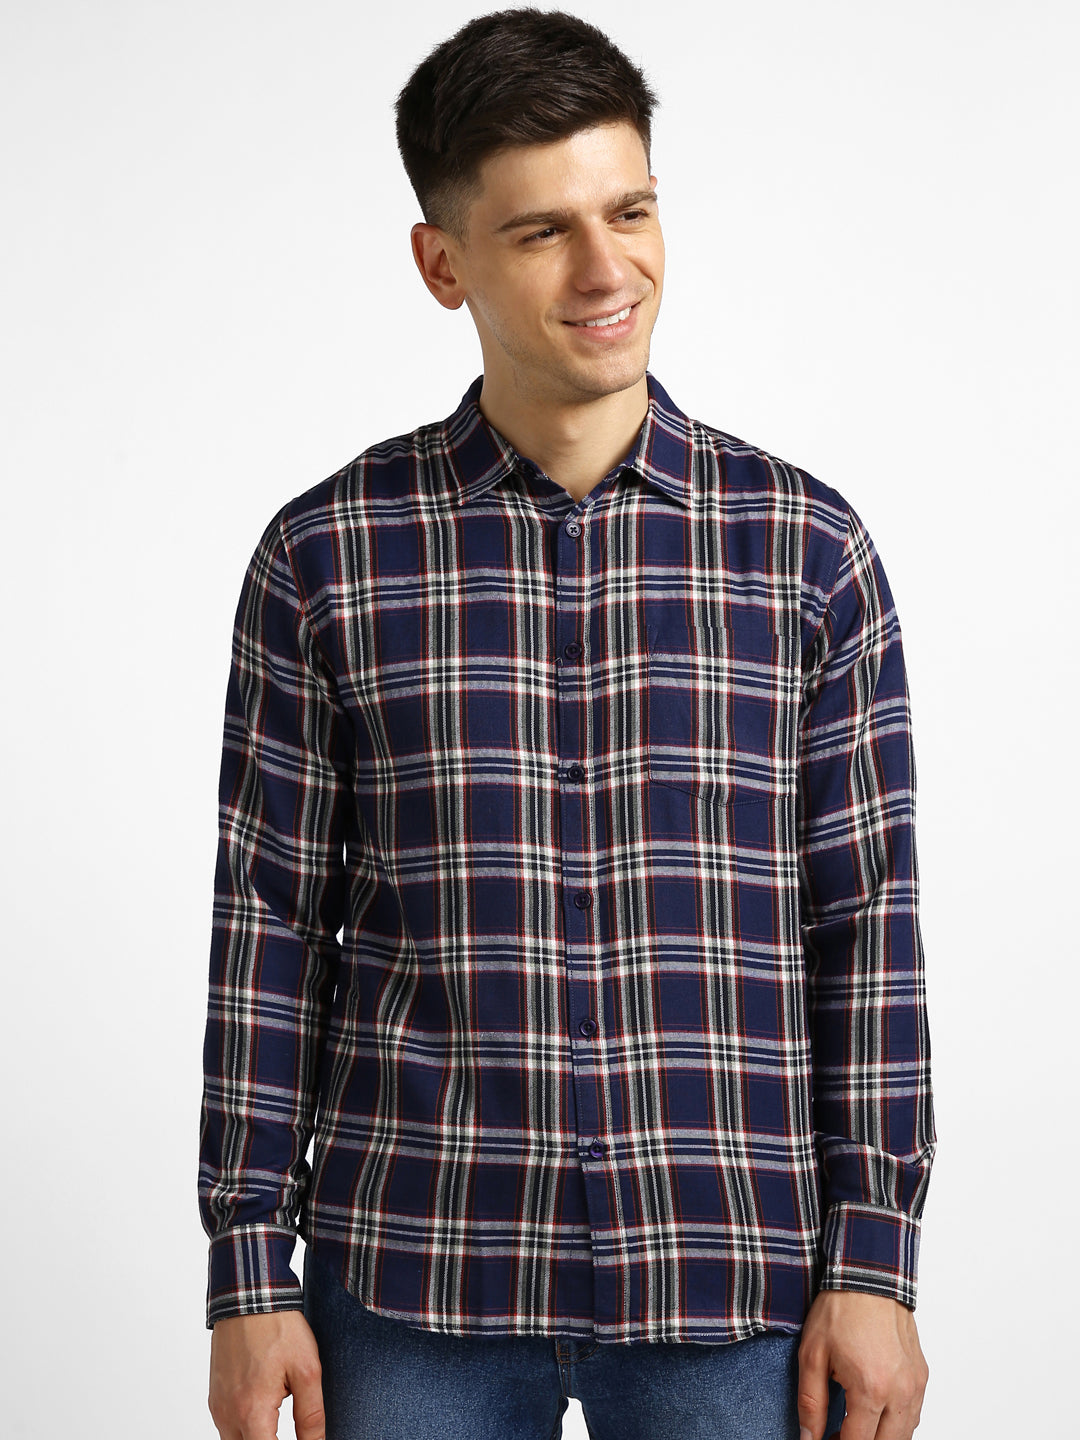 Men's Navy Blue Cotton Full Sleeve Slim Fit Casual Checkered Shirt